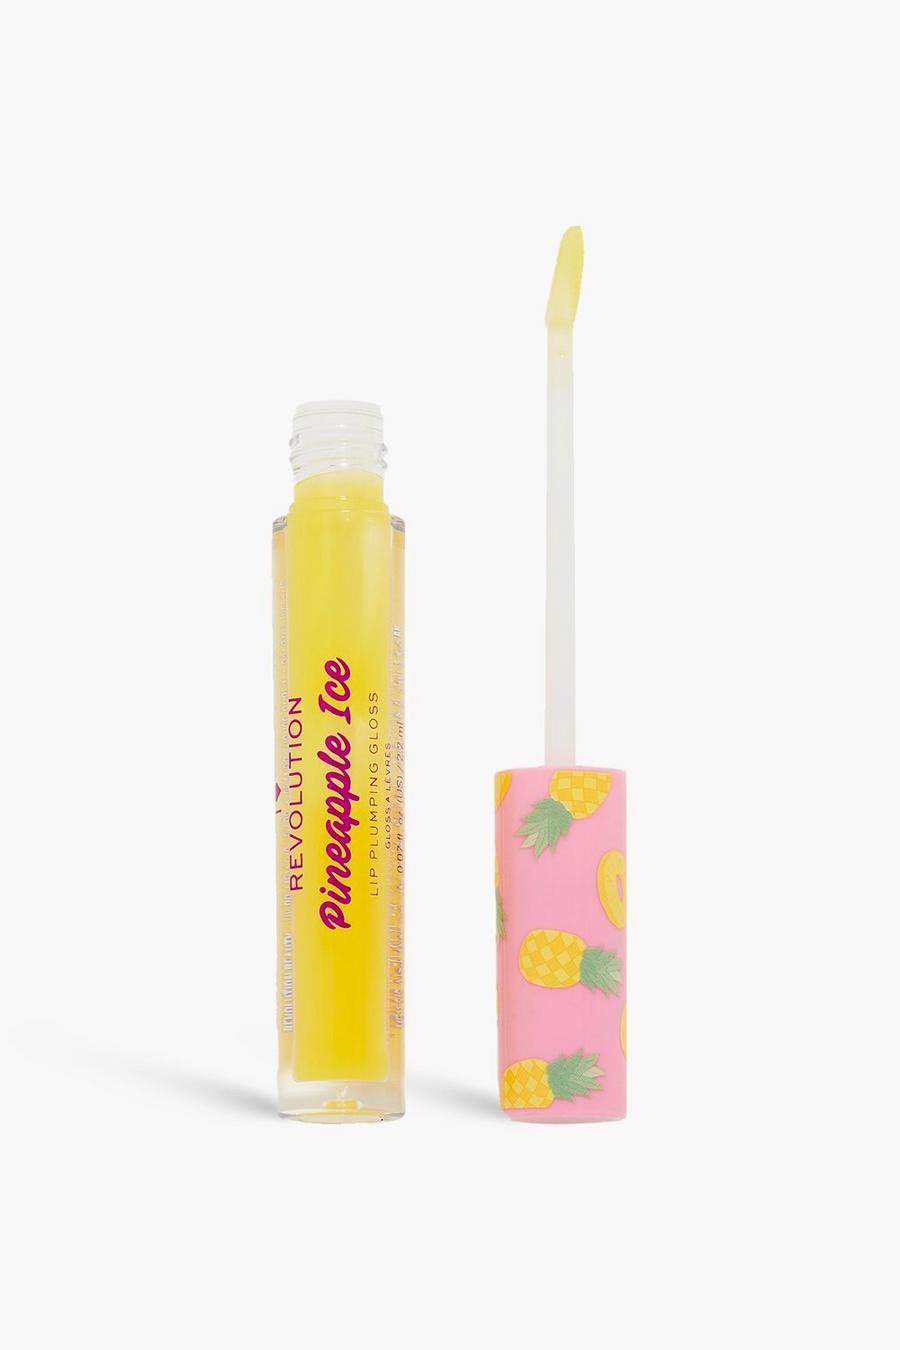 Clear I Heart Revolution Tasty Pineapple Ice Plumping Gloss Freeze